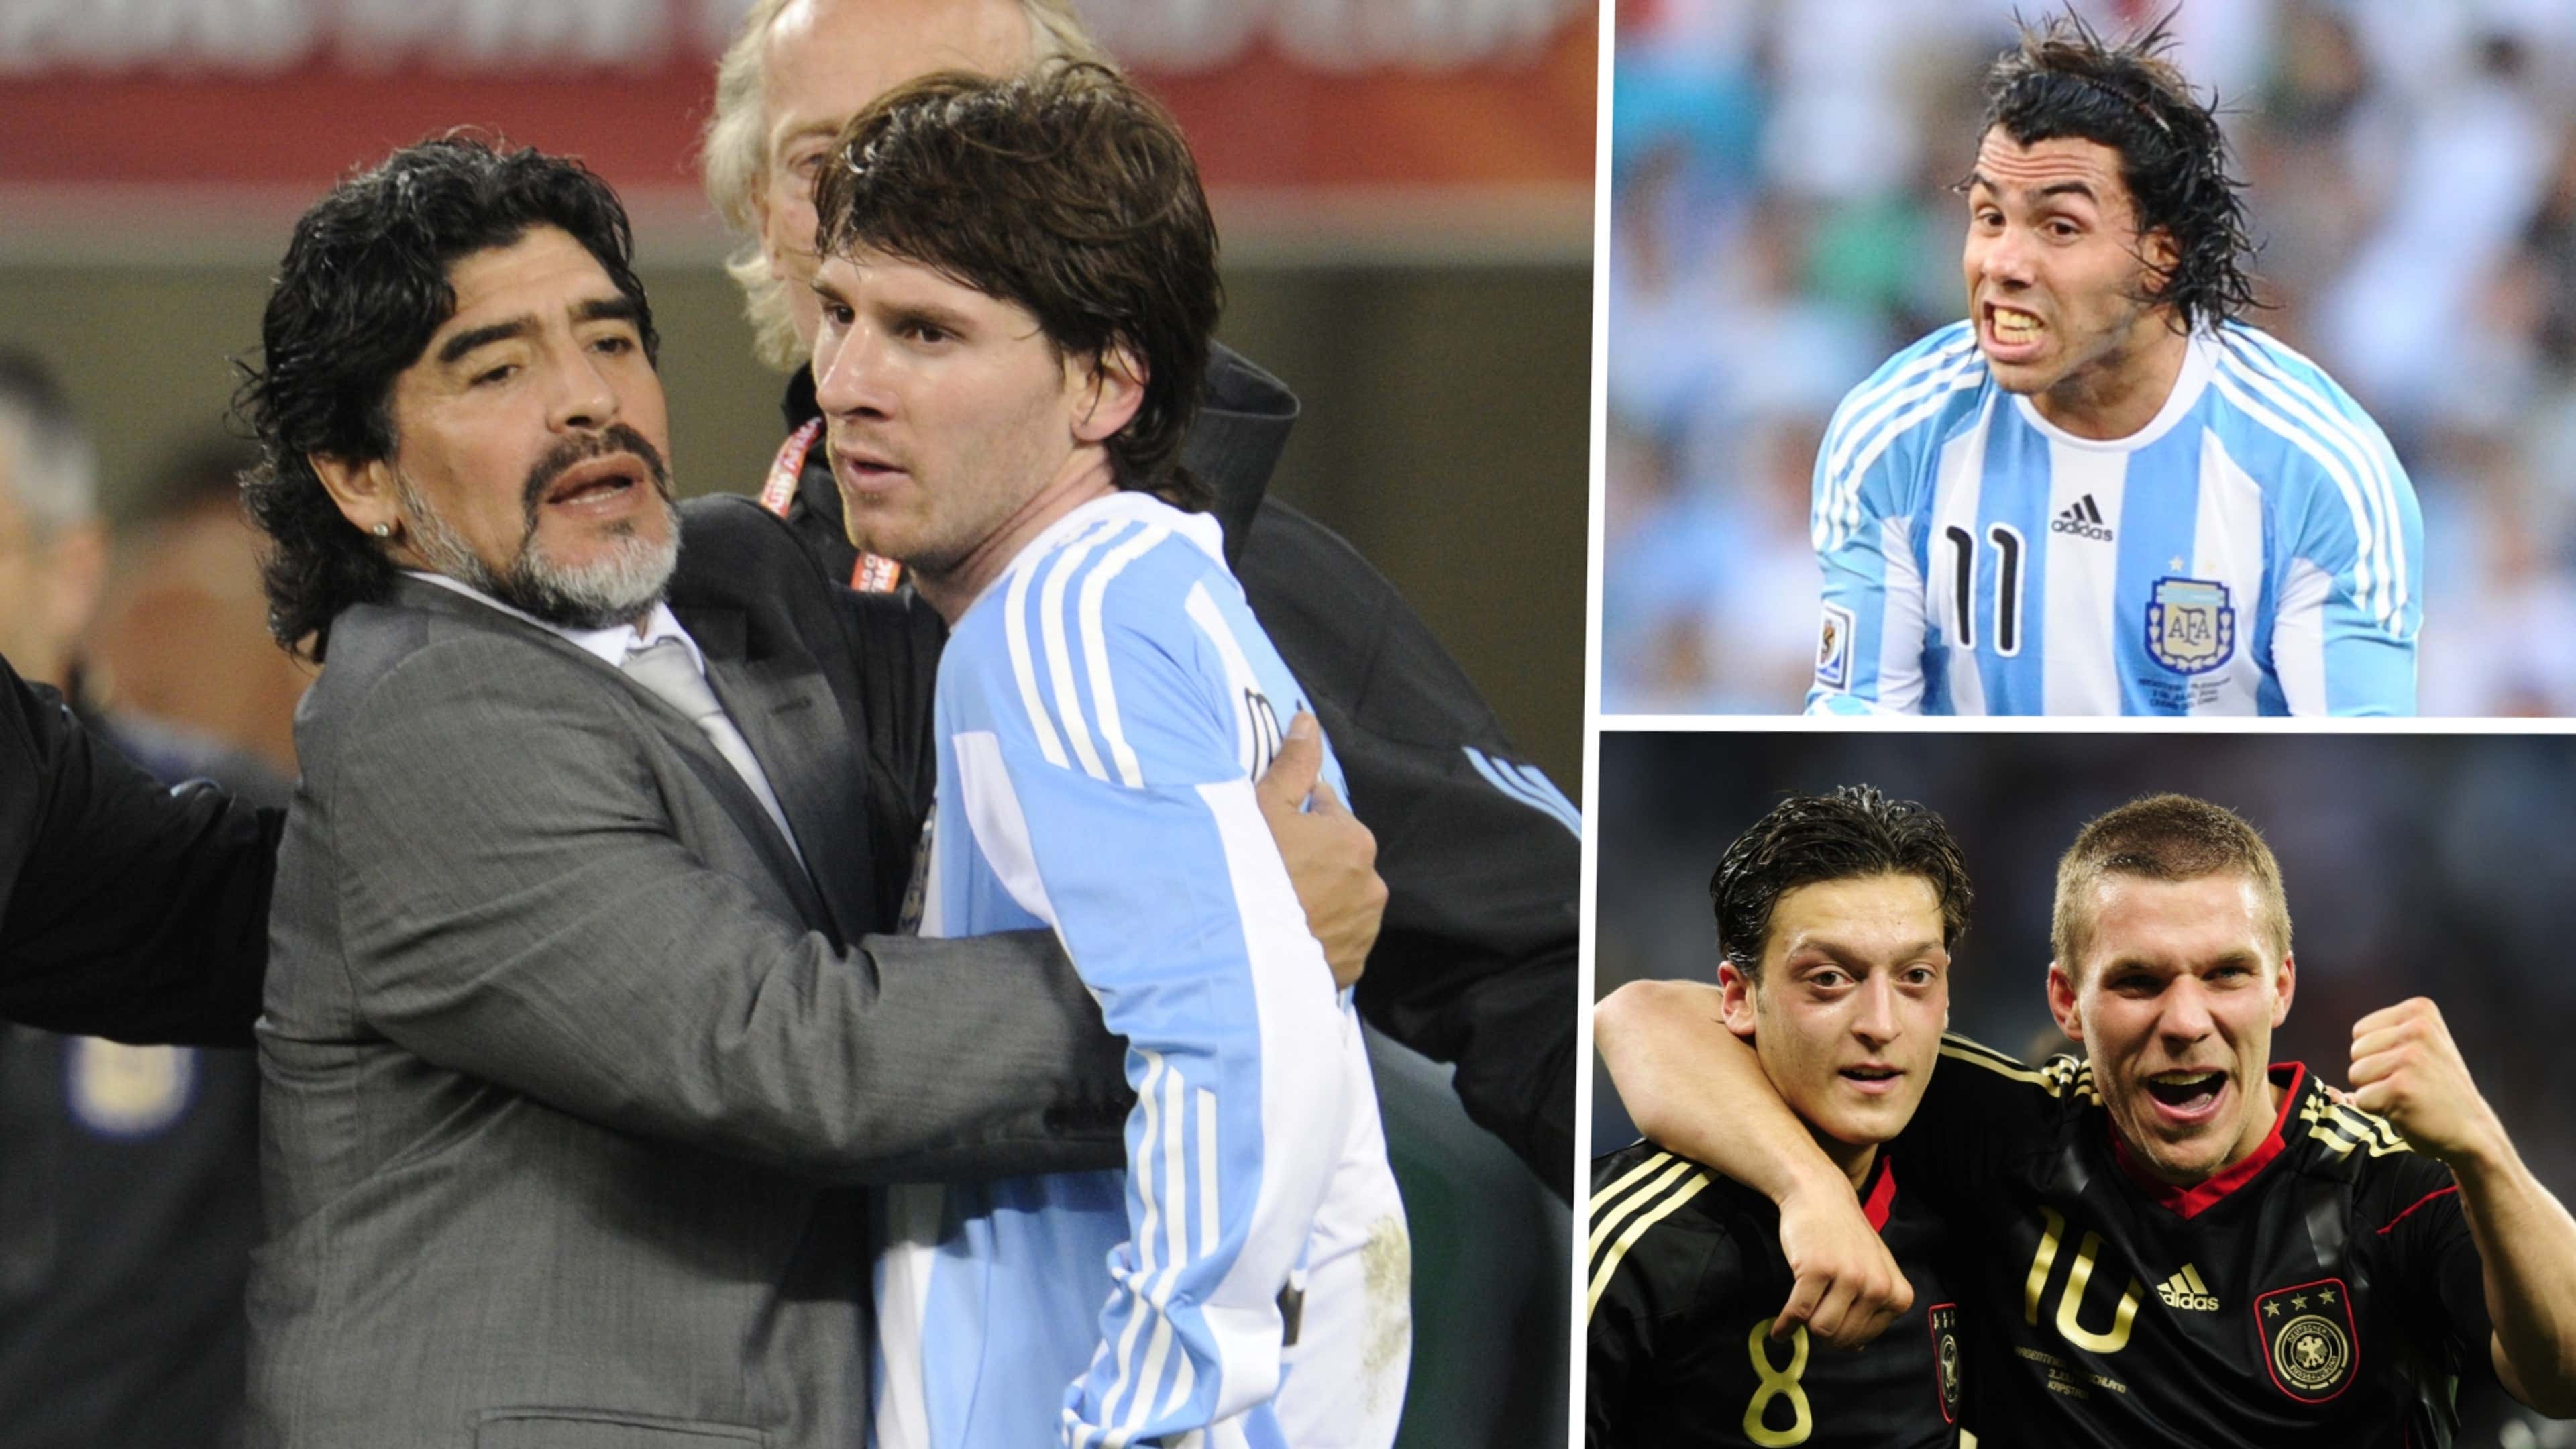 Suck it, and keep sucking' - How Maradona blew Messi's best chance